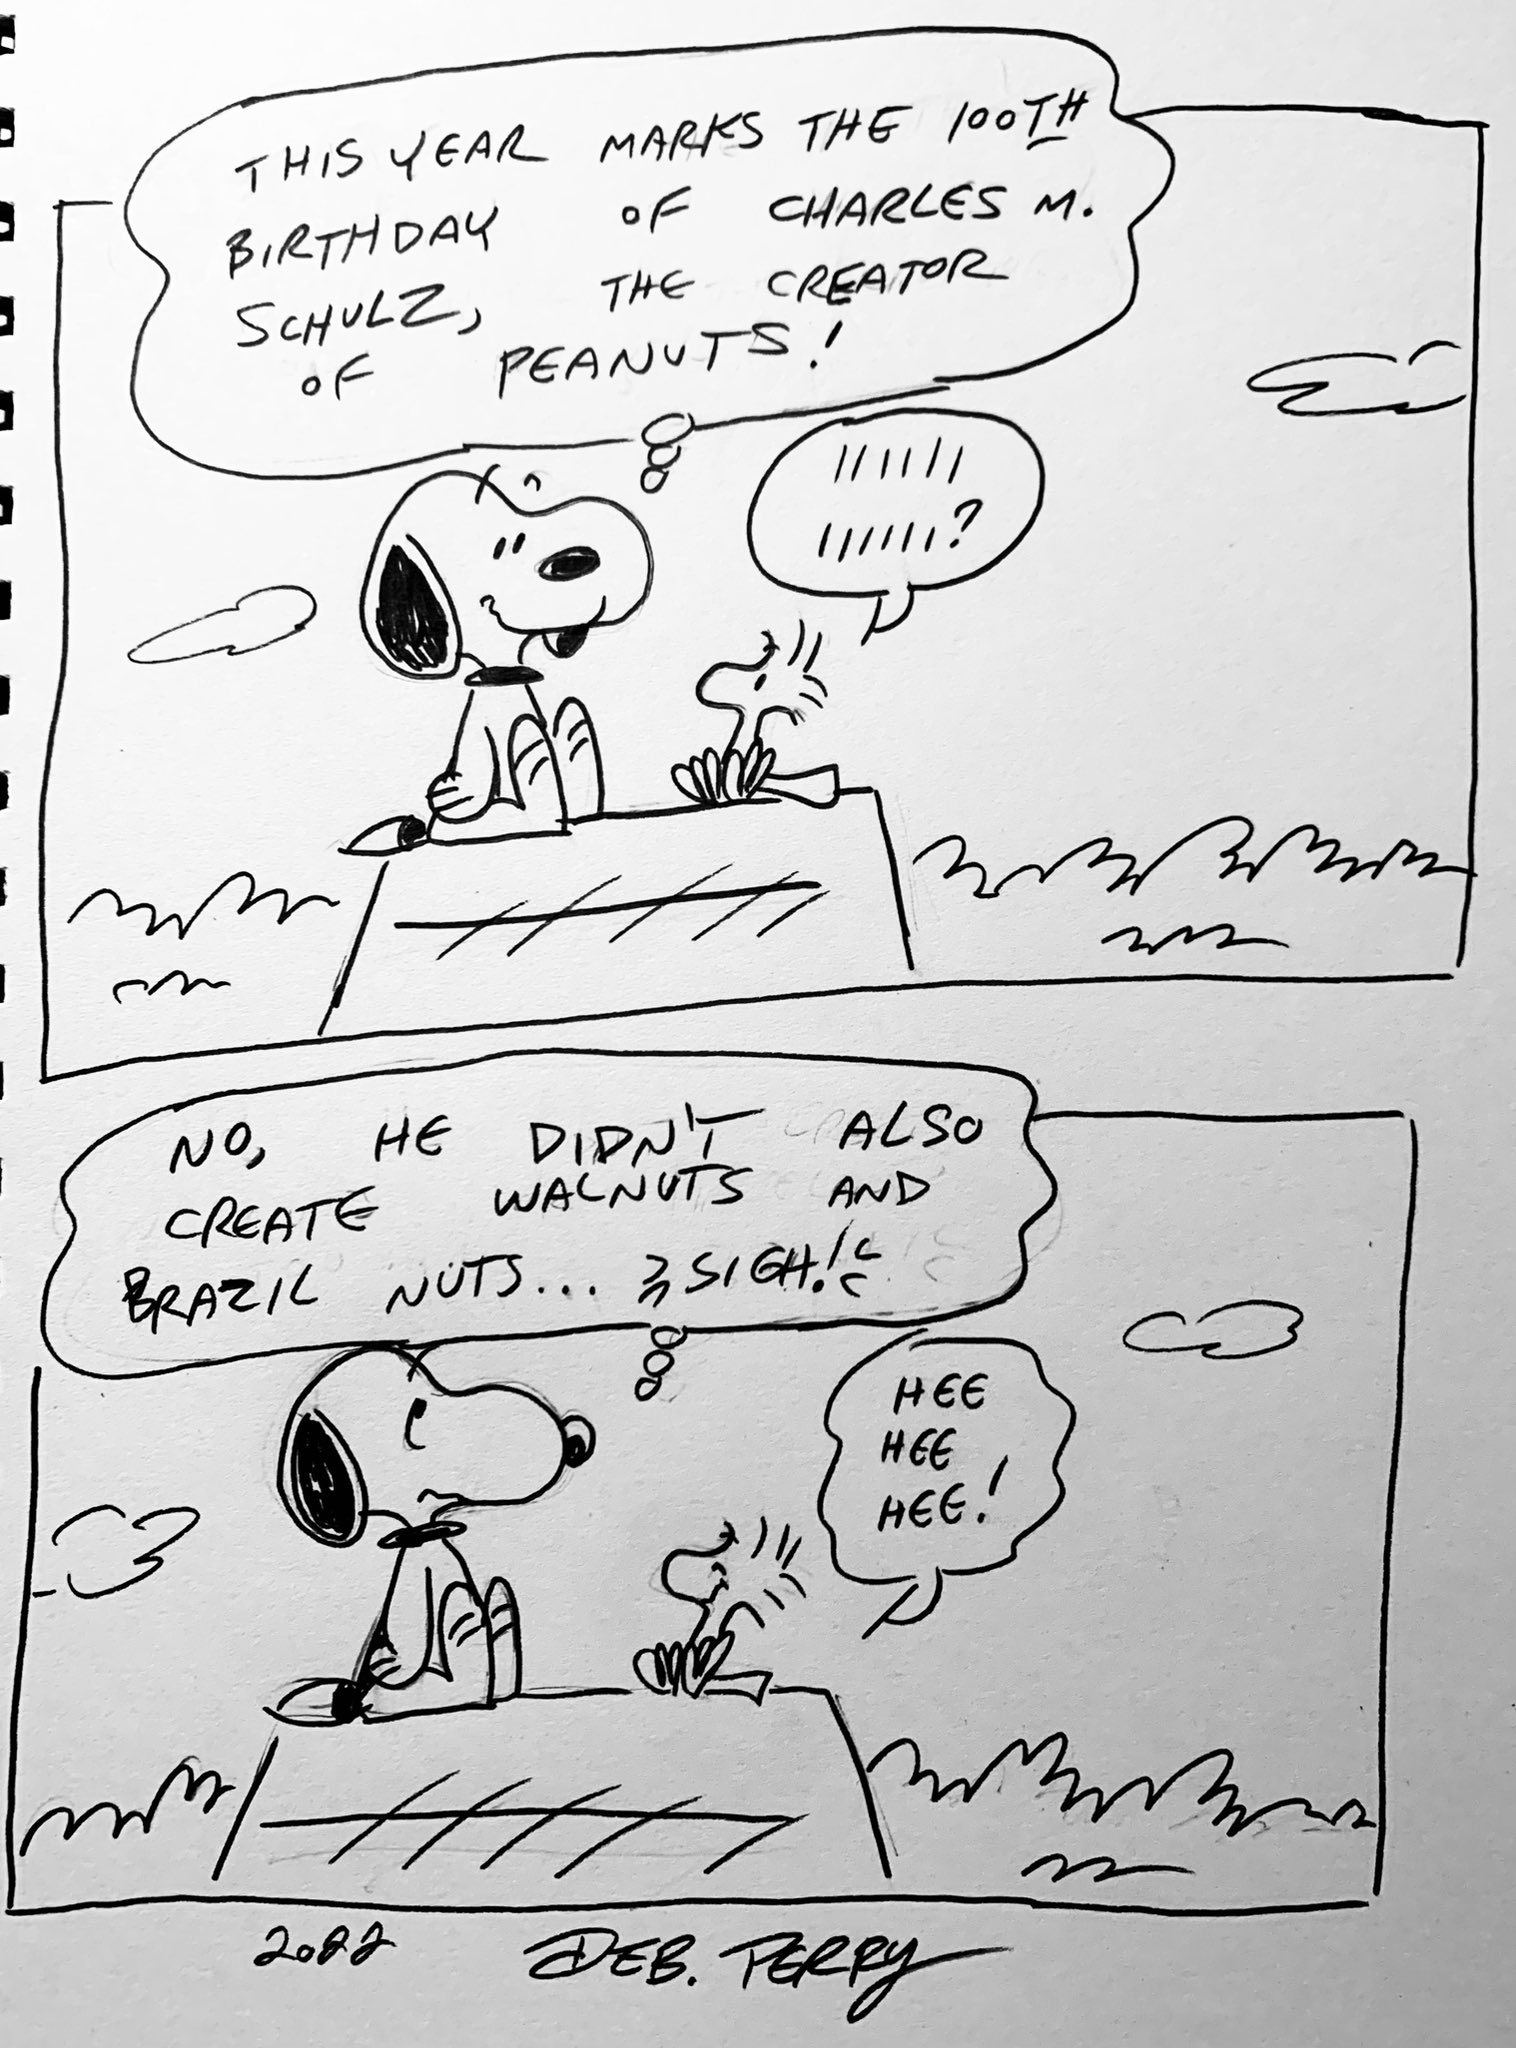 This has to be the dumbest gag I ever thought of! #Schulz100
